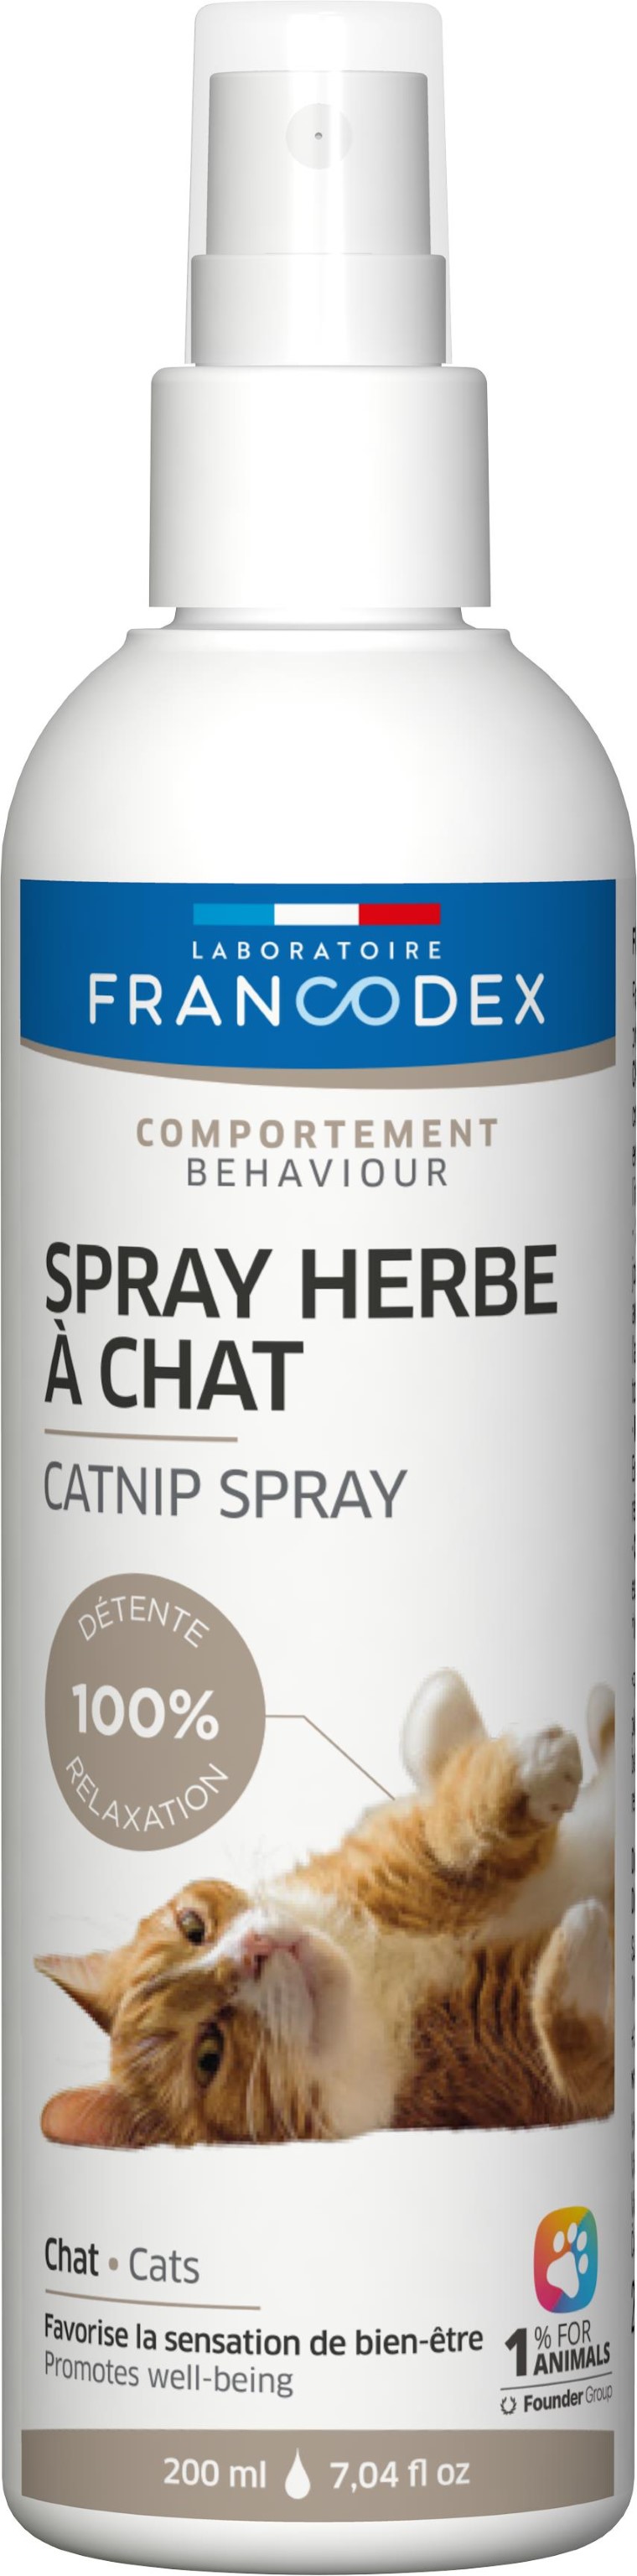 Comportement Chat – Francodex Spray herbe à chat – 200 ml 211483